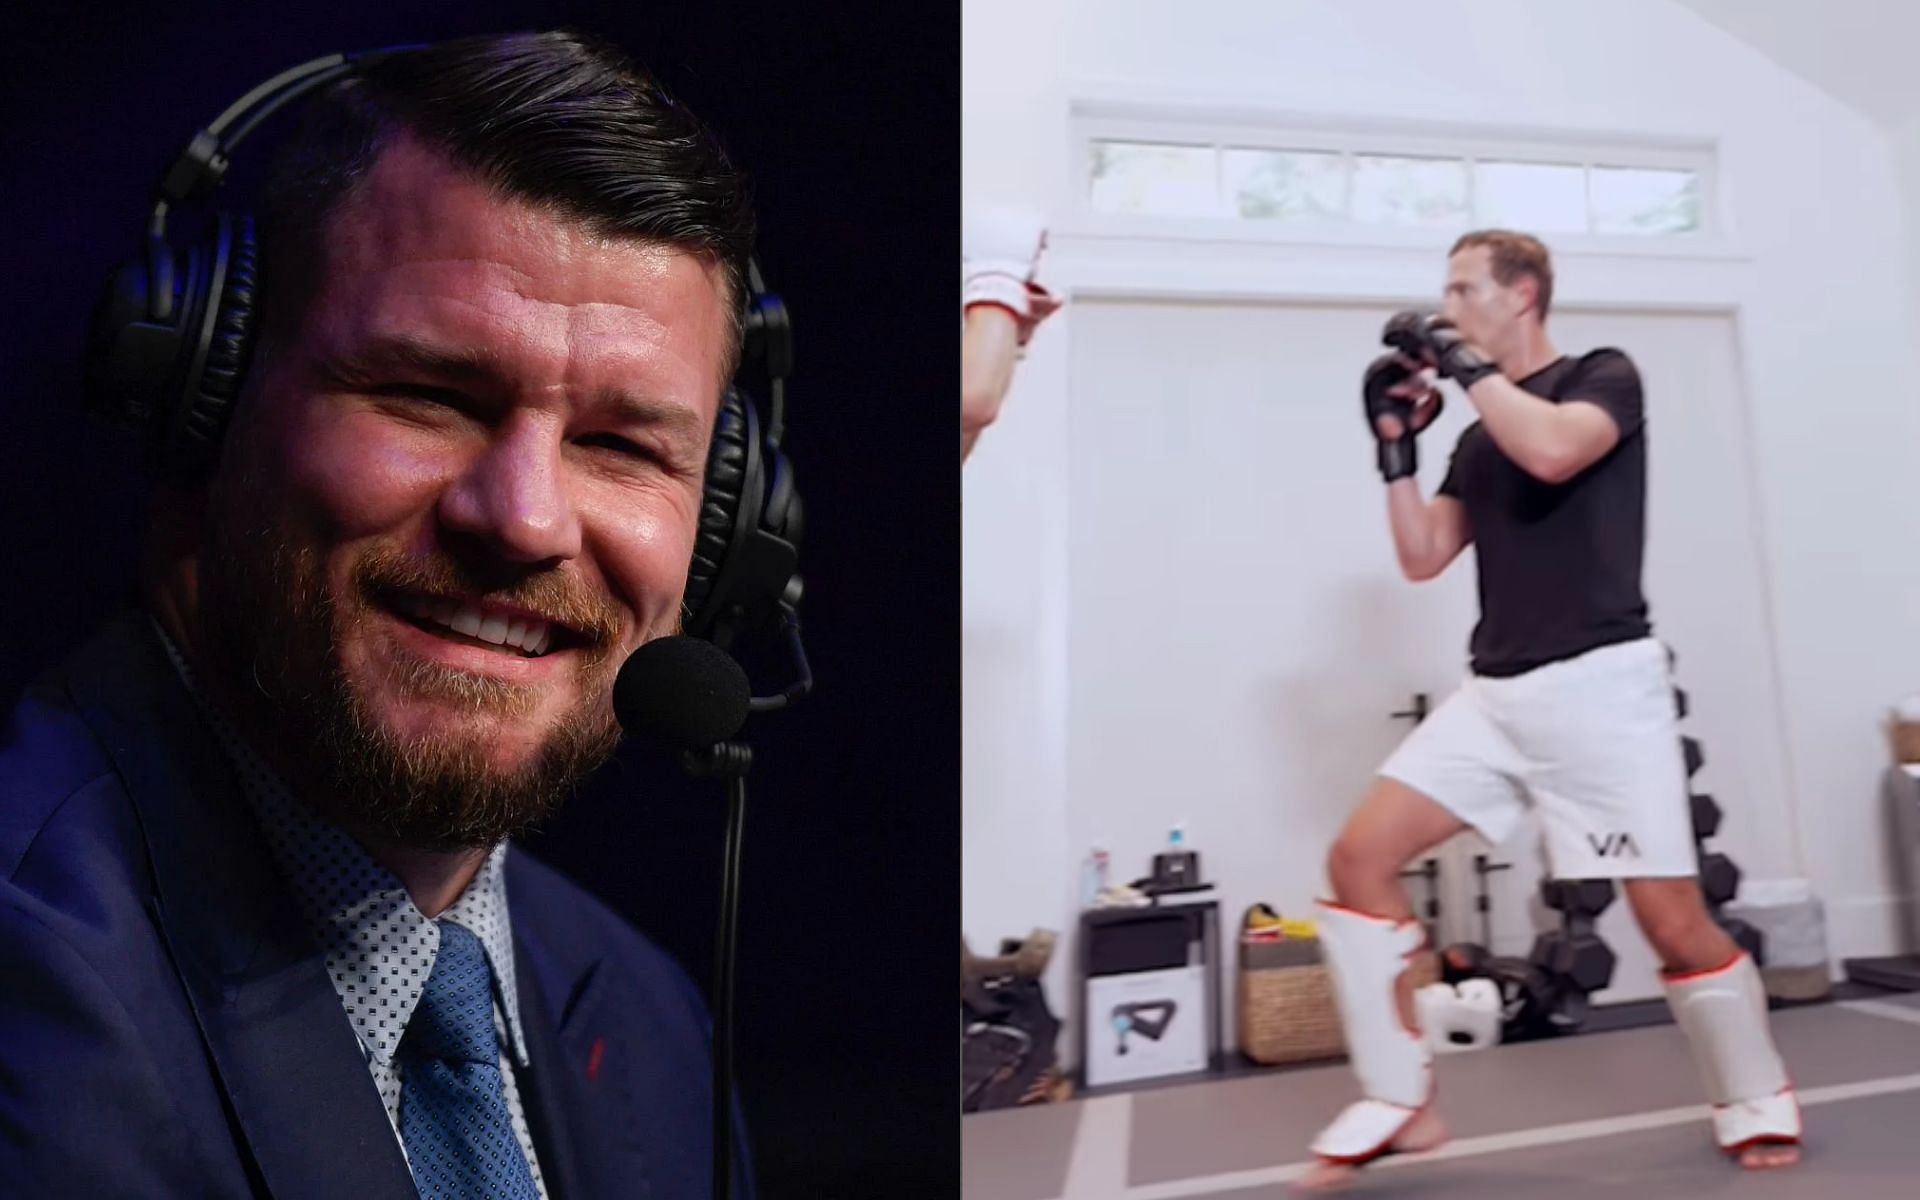 Michael Bisping (left) and Mark Zuckerberg (right) [Image courtesy: @zuck on Instagram]